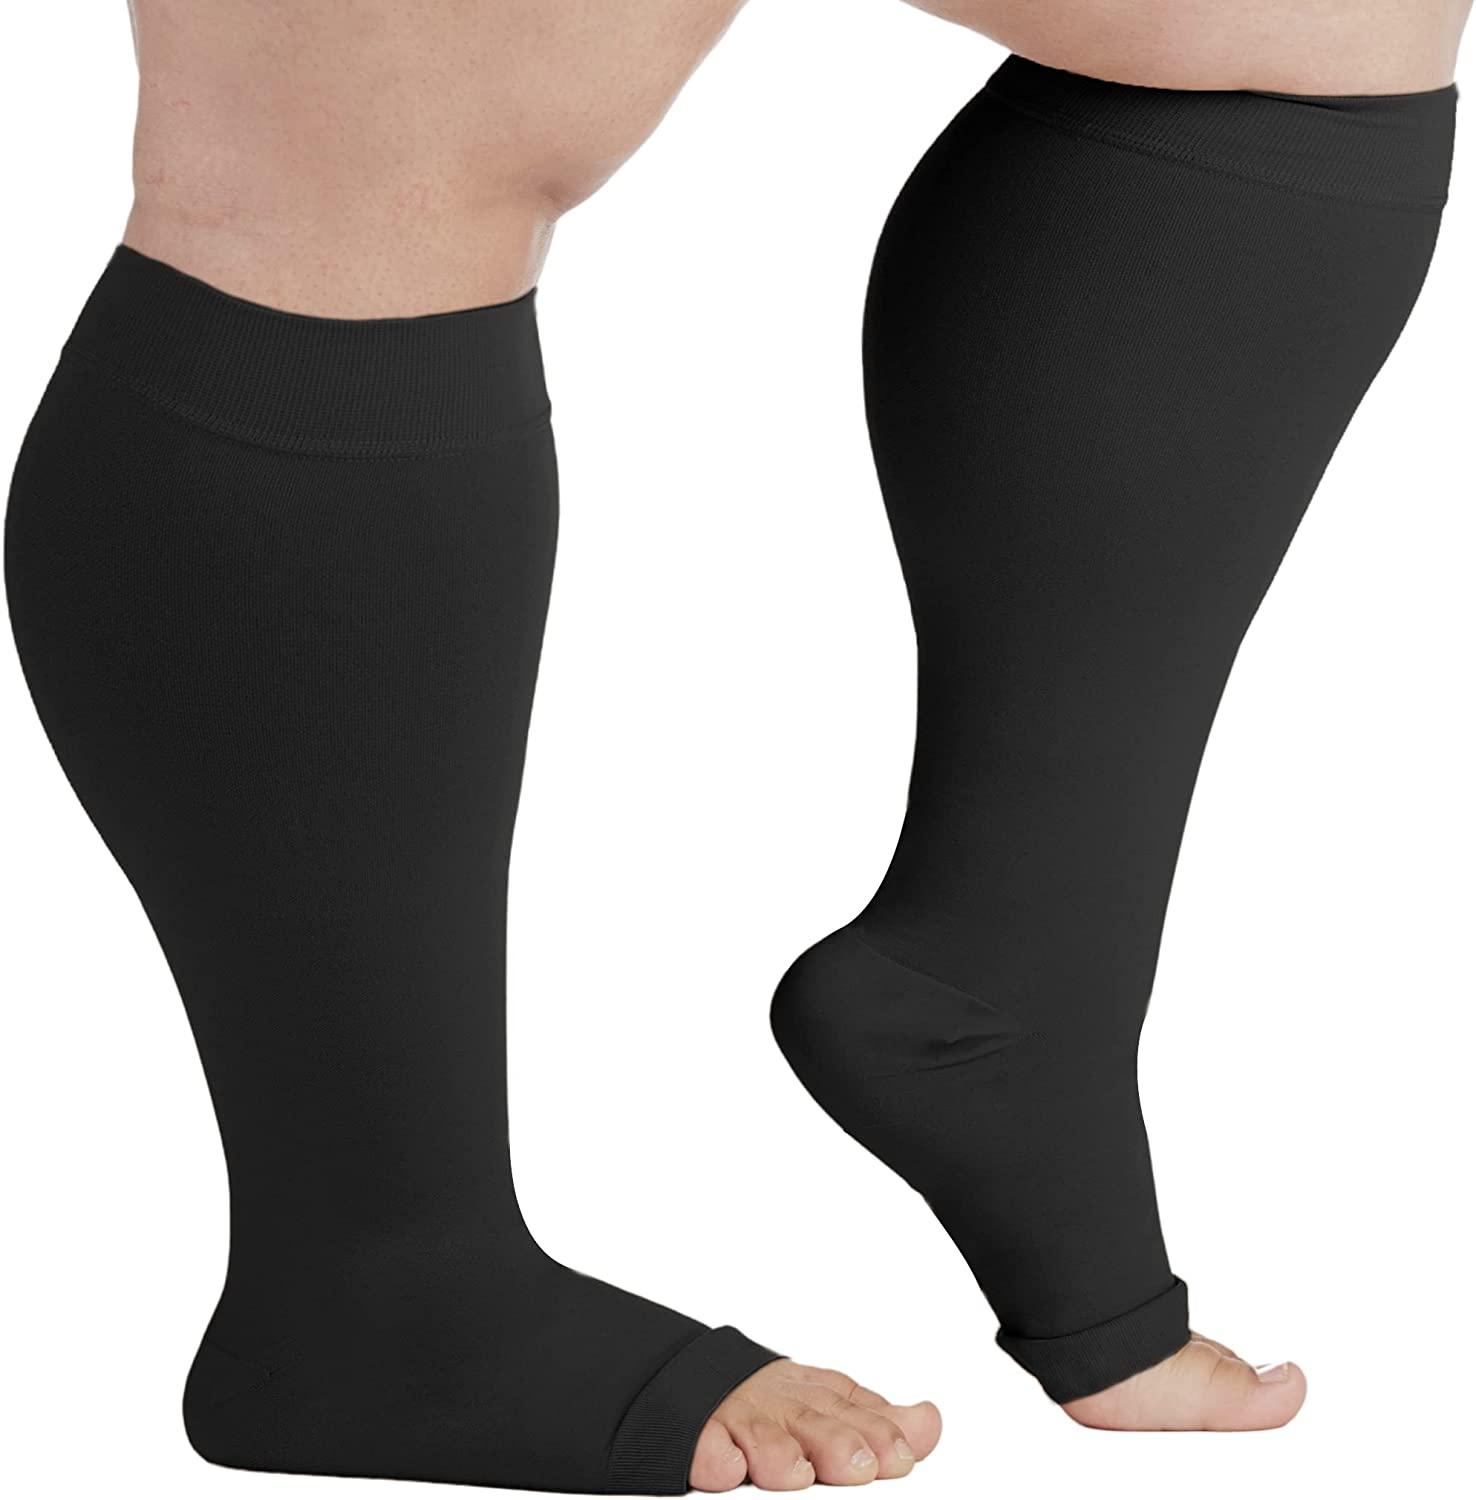 3 Pack) 3XL Absolute Support Plus Size Compression Socks Wide Calf for Women  and Men Opaque 20-30mmHg Open Toe - Compression Knee High for Circulation Varicose  Veins Swelling Edema - Black, 3X-Large